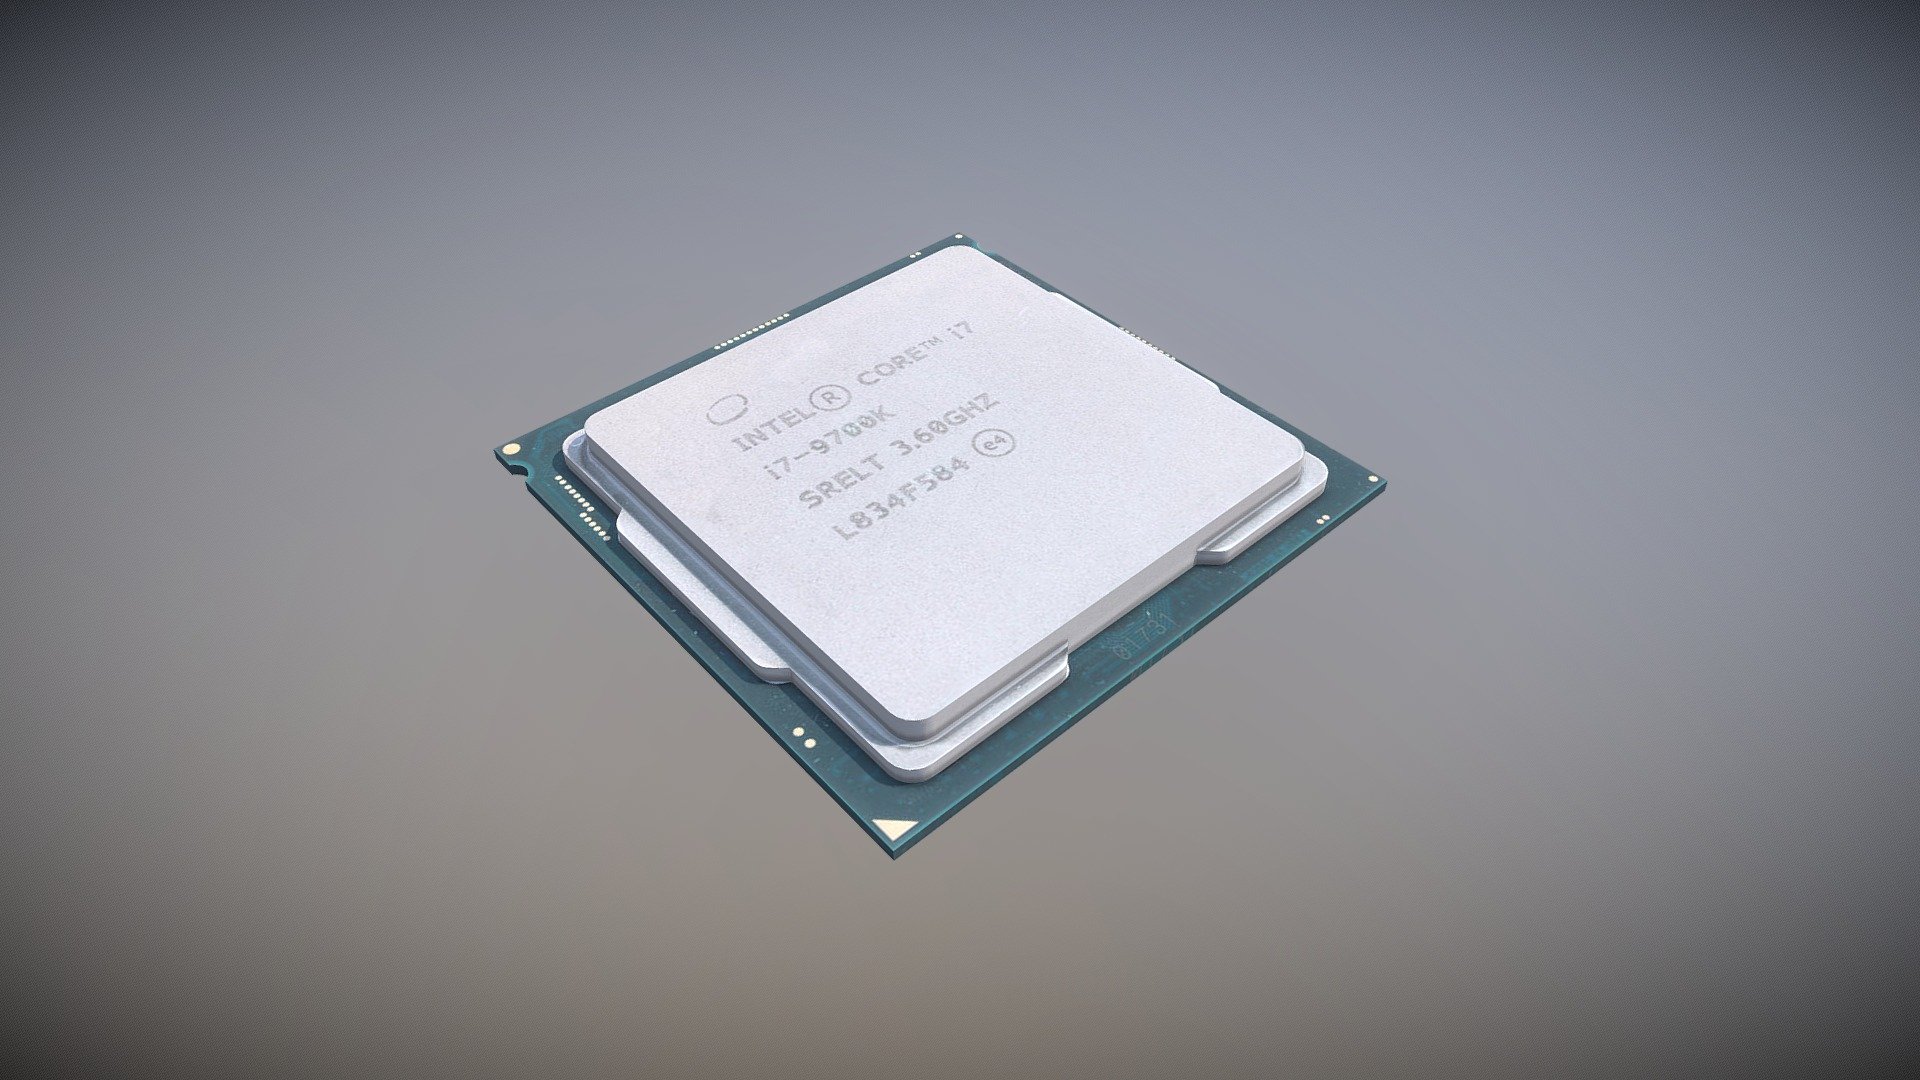 [CPU] Intel Core i7-9700K

A high-end CPU meant to tackle heavy computing needs. Commonly used for heavy workloard such as Rendering but also used to boost Gaming experiences 3d model